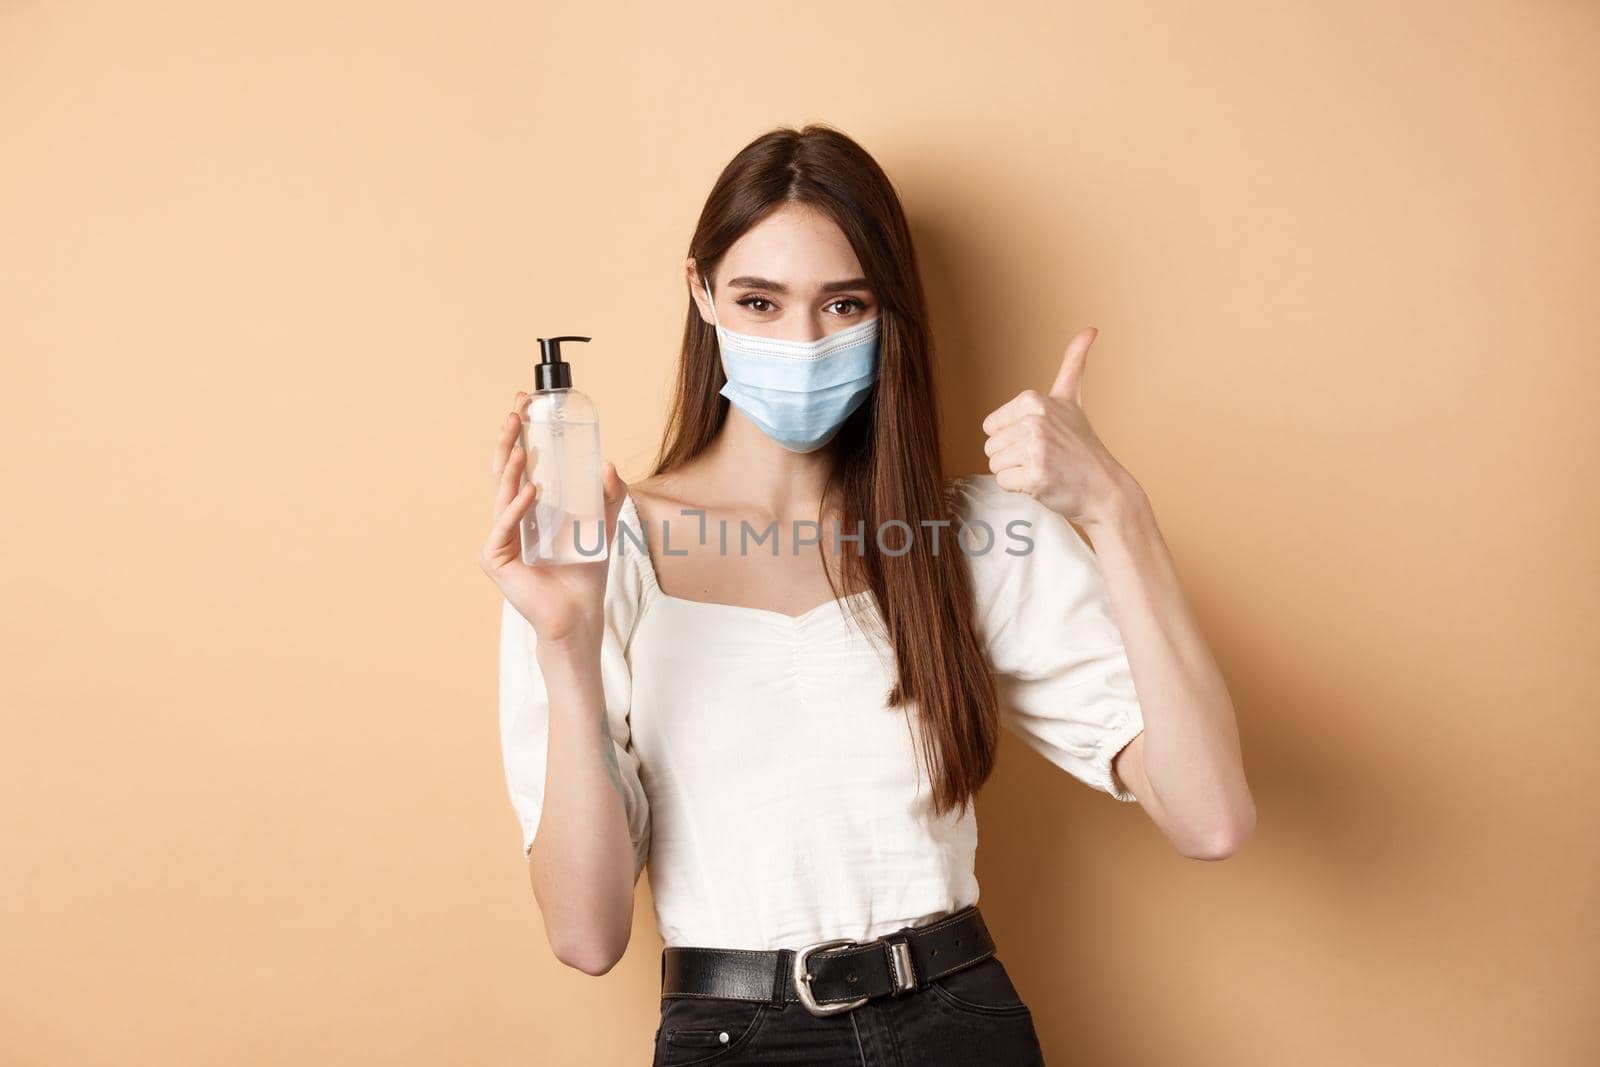 Covid-19 and preventive measures concept. Smiling girl in medical mask show thumb up and hand sanitizer, recommend product for disinfection, beige background.